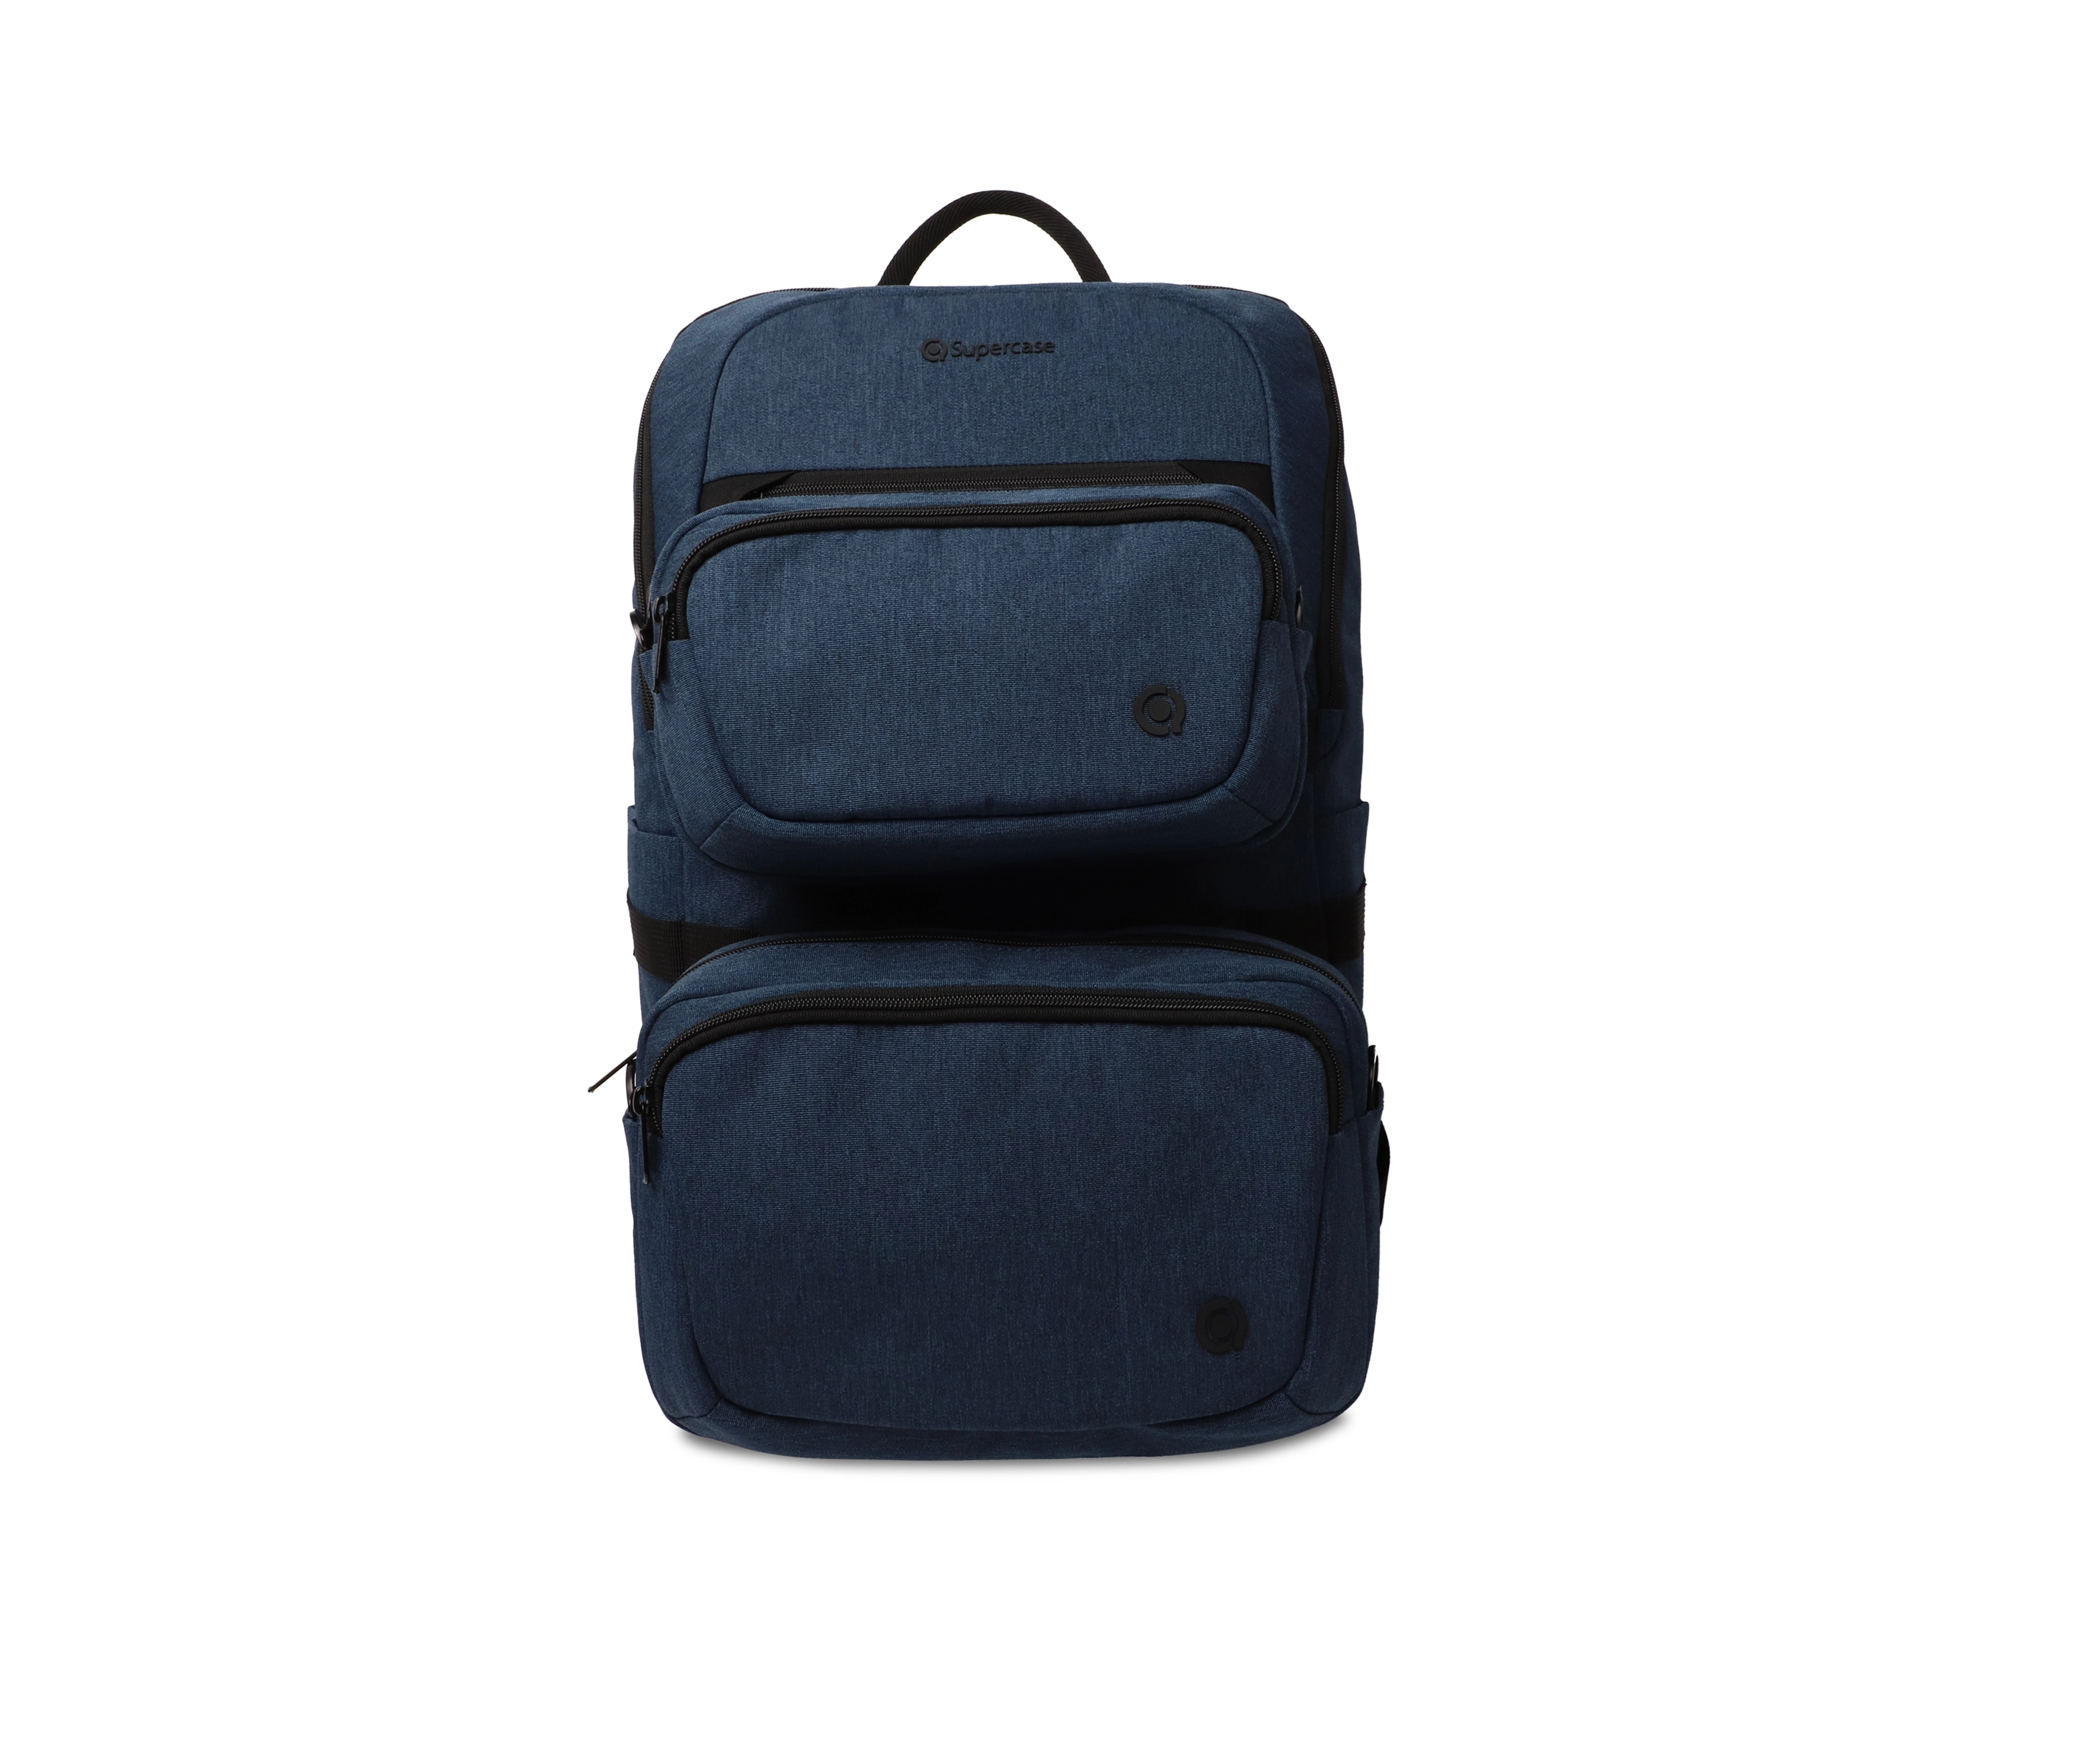 backpack with detachable bag